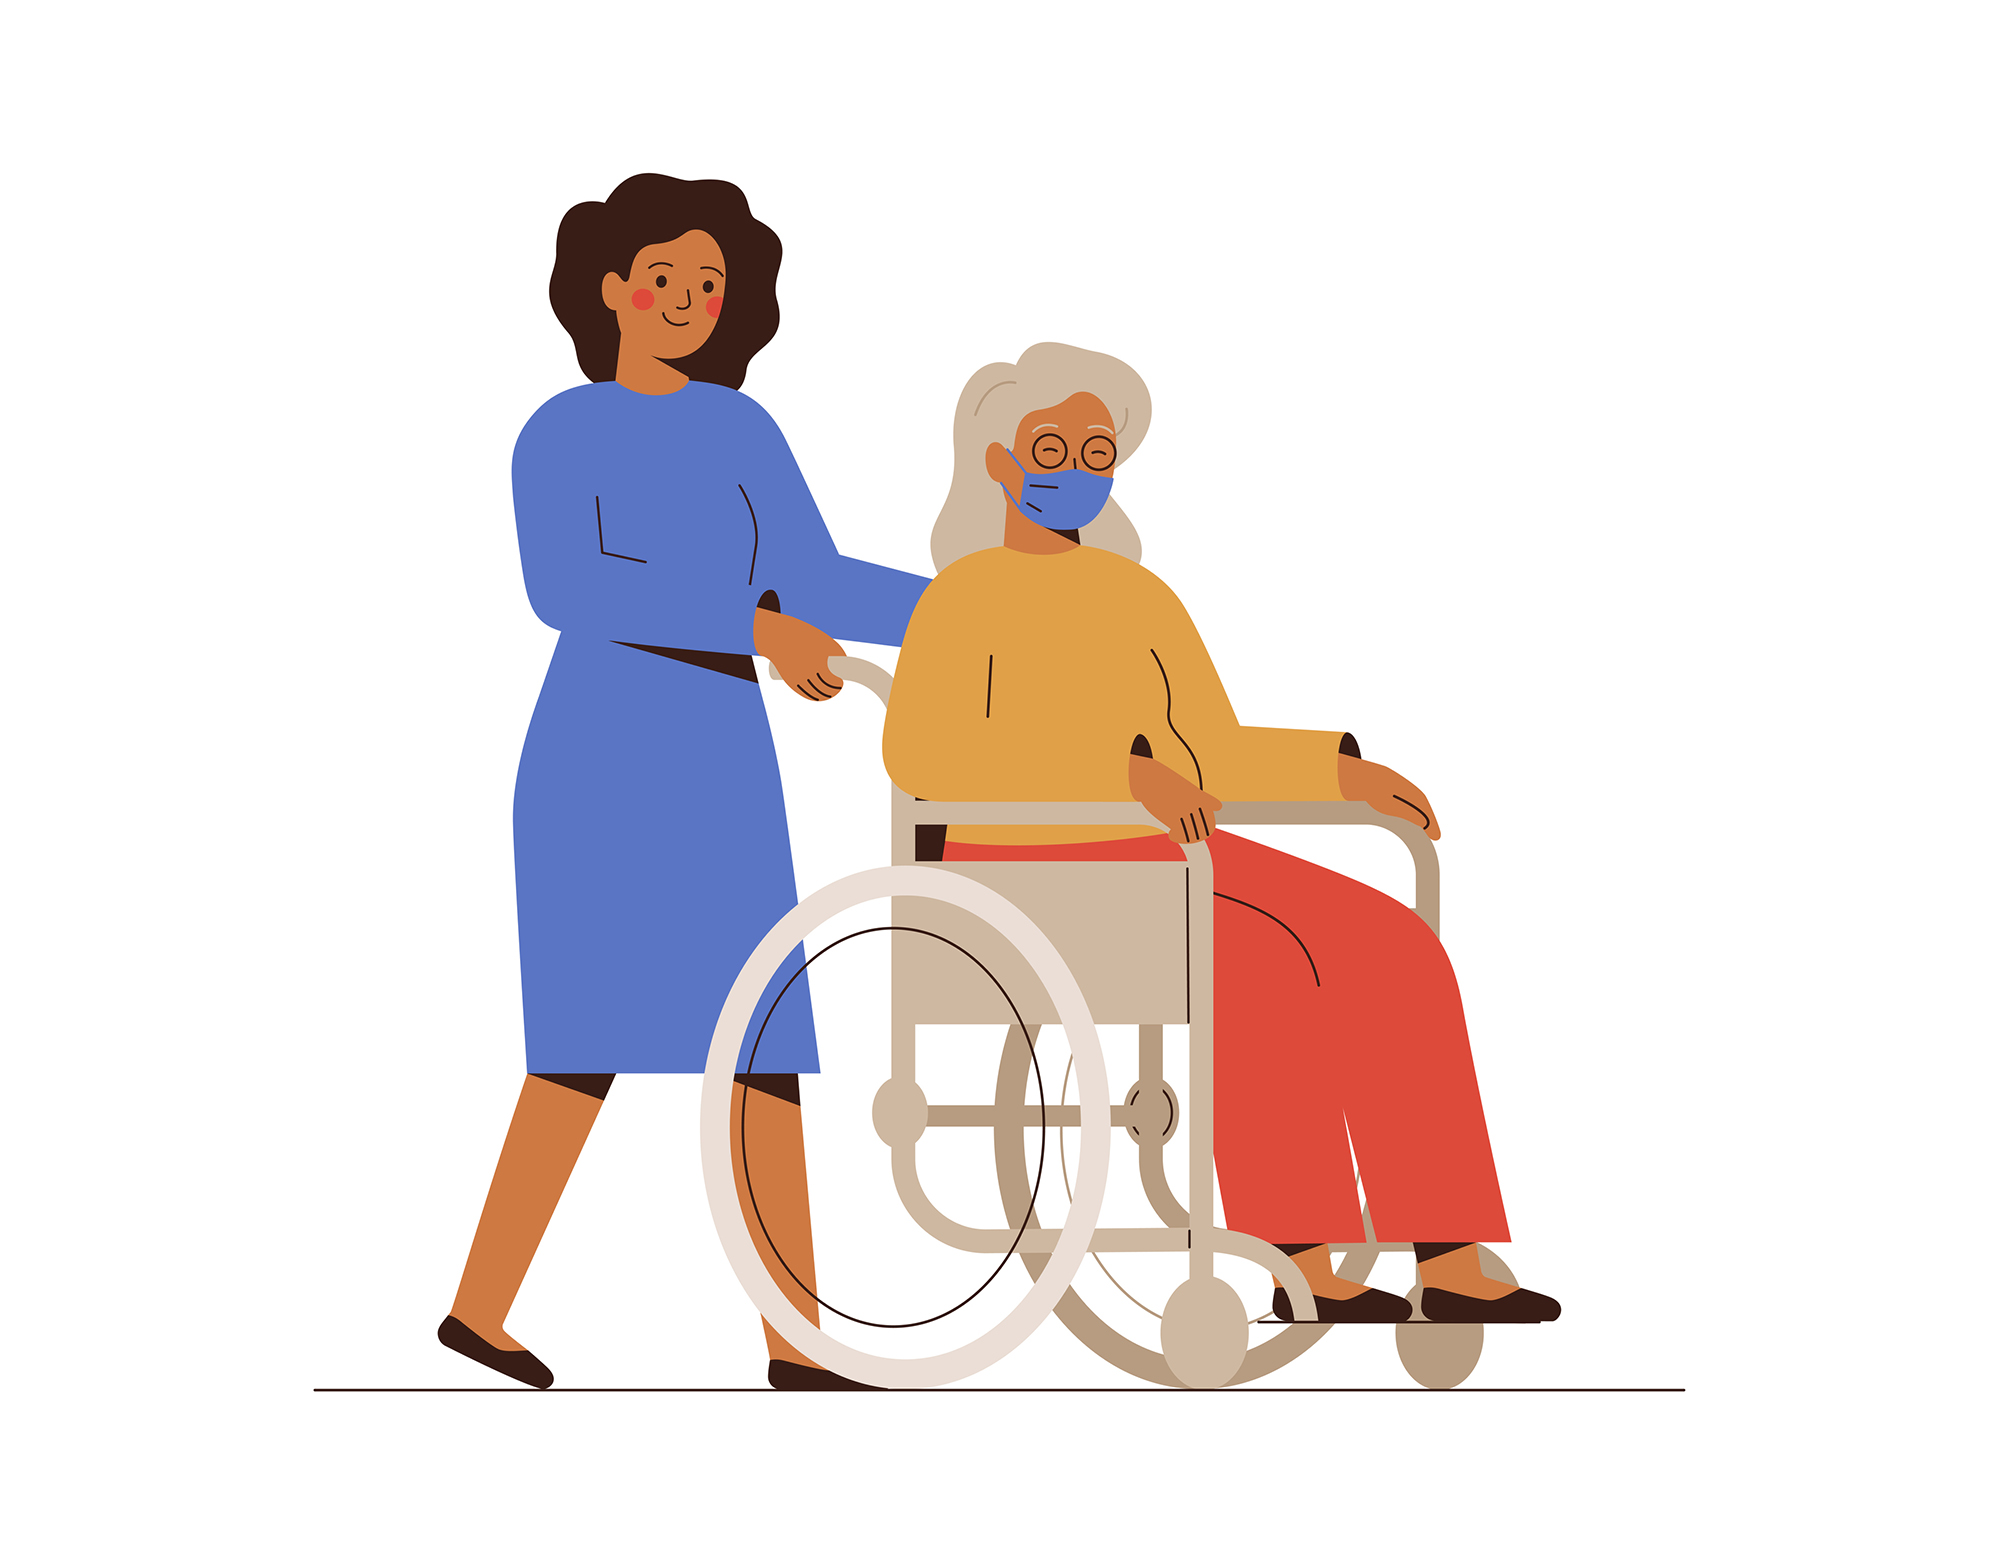 Vector illustration of a Nurse or social worker helping an elderly disabled patient by guiding their wheelchair.